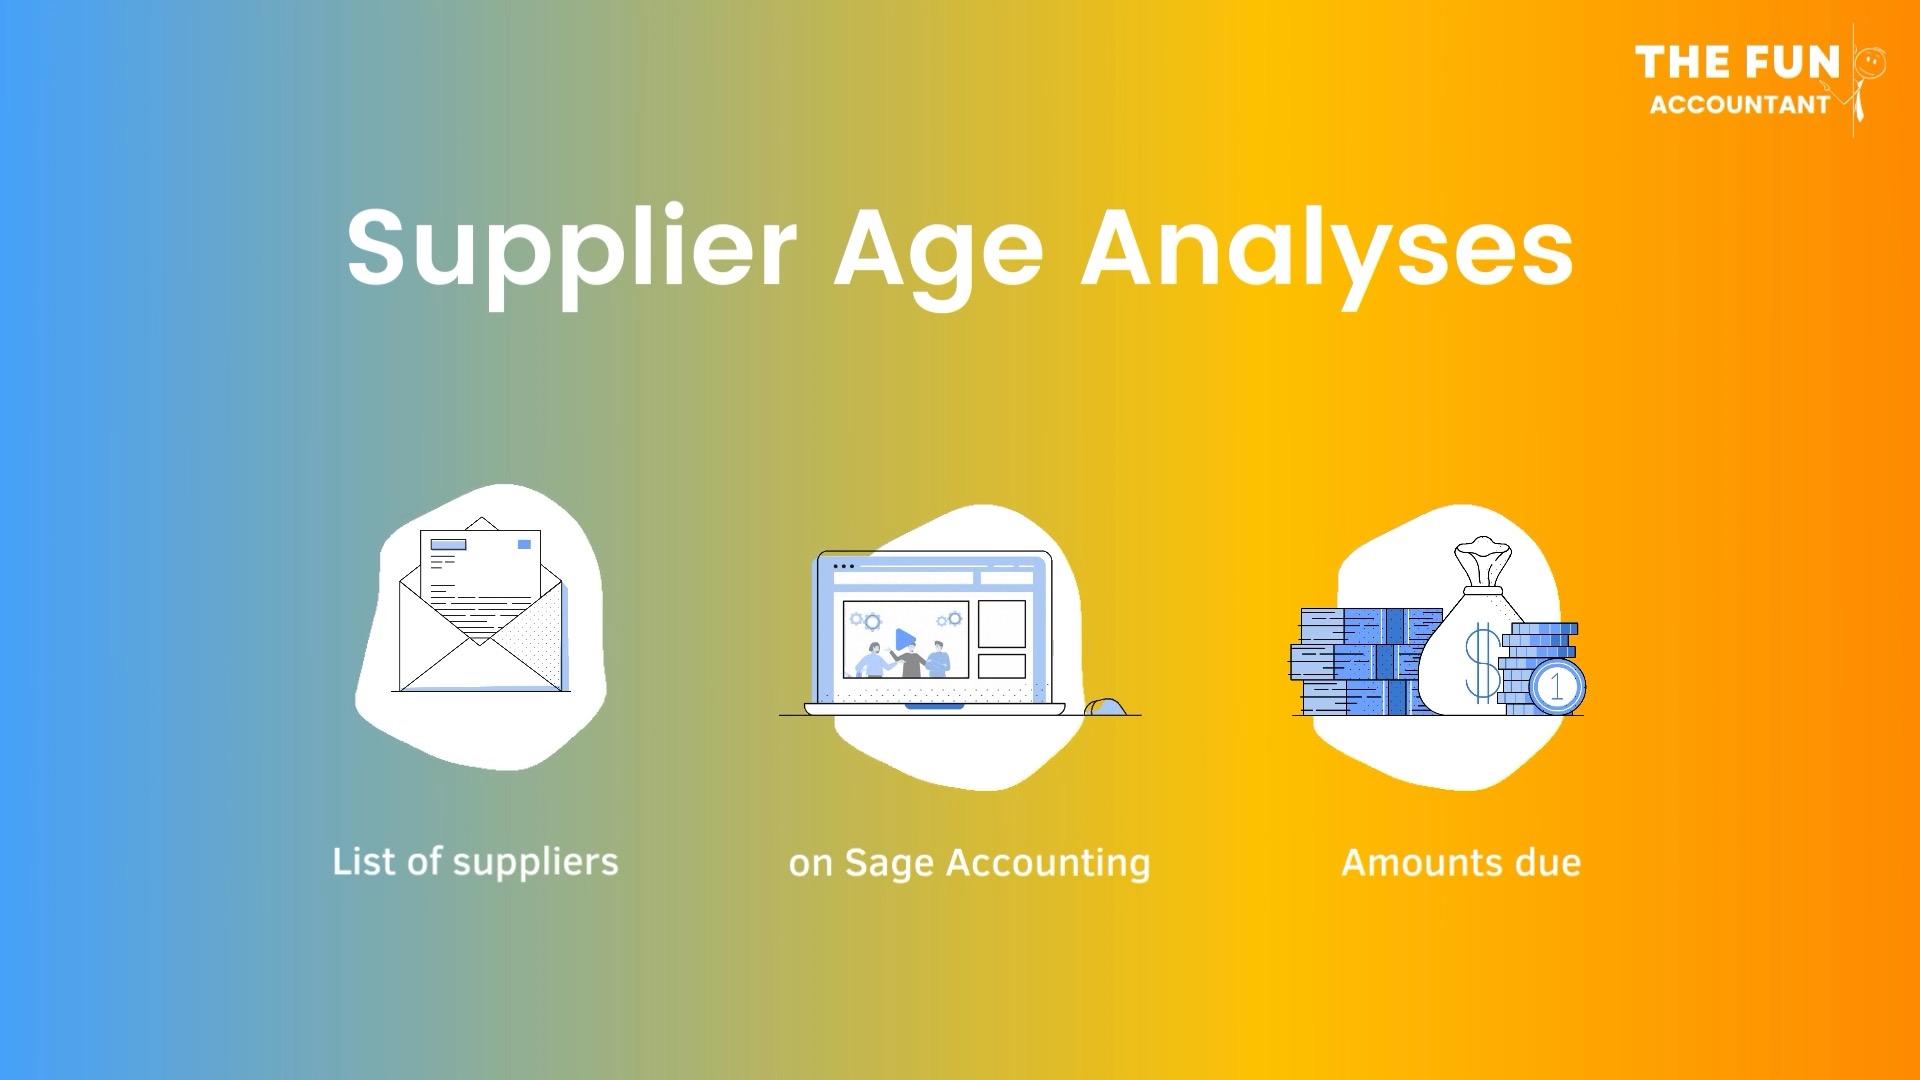 Supplier Age Analyses in Sage Accounting by The Fun Accountant.